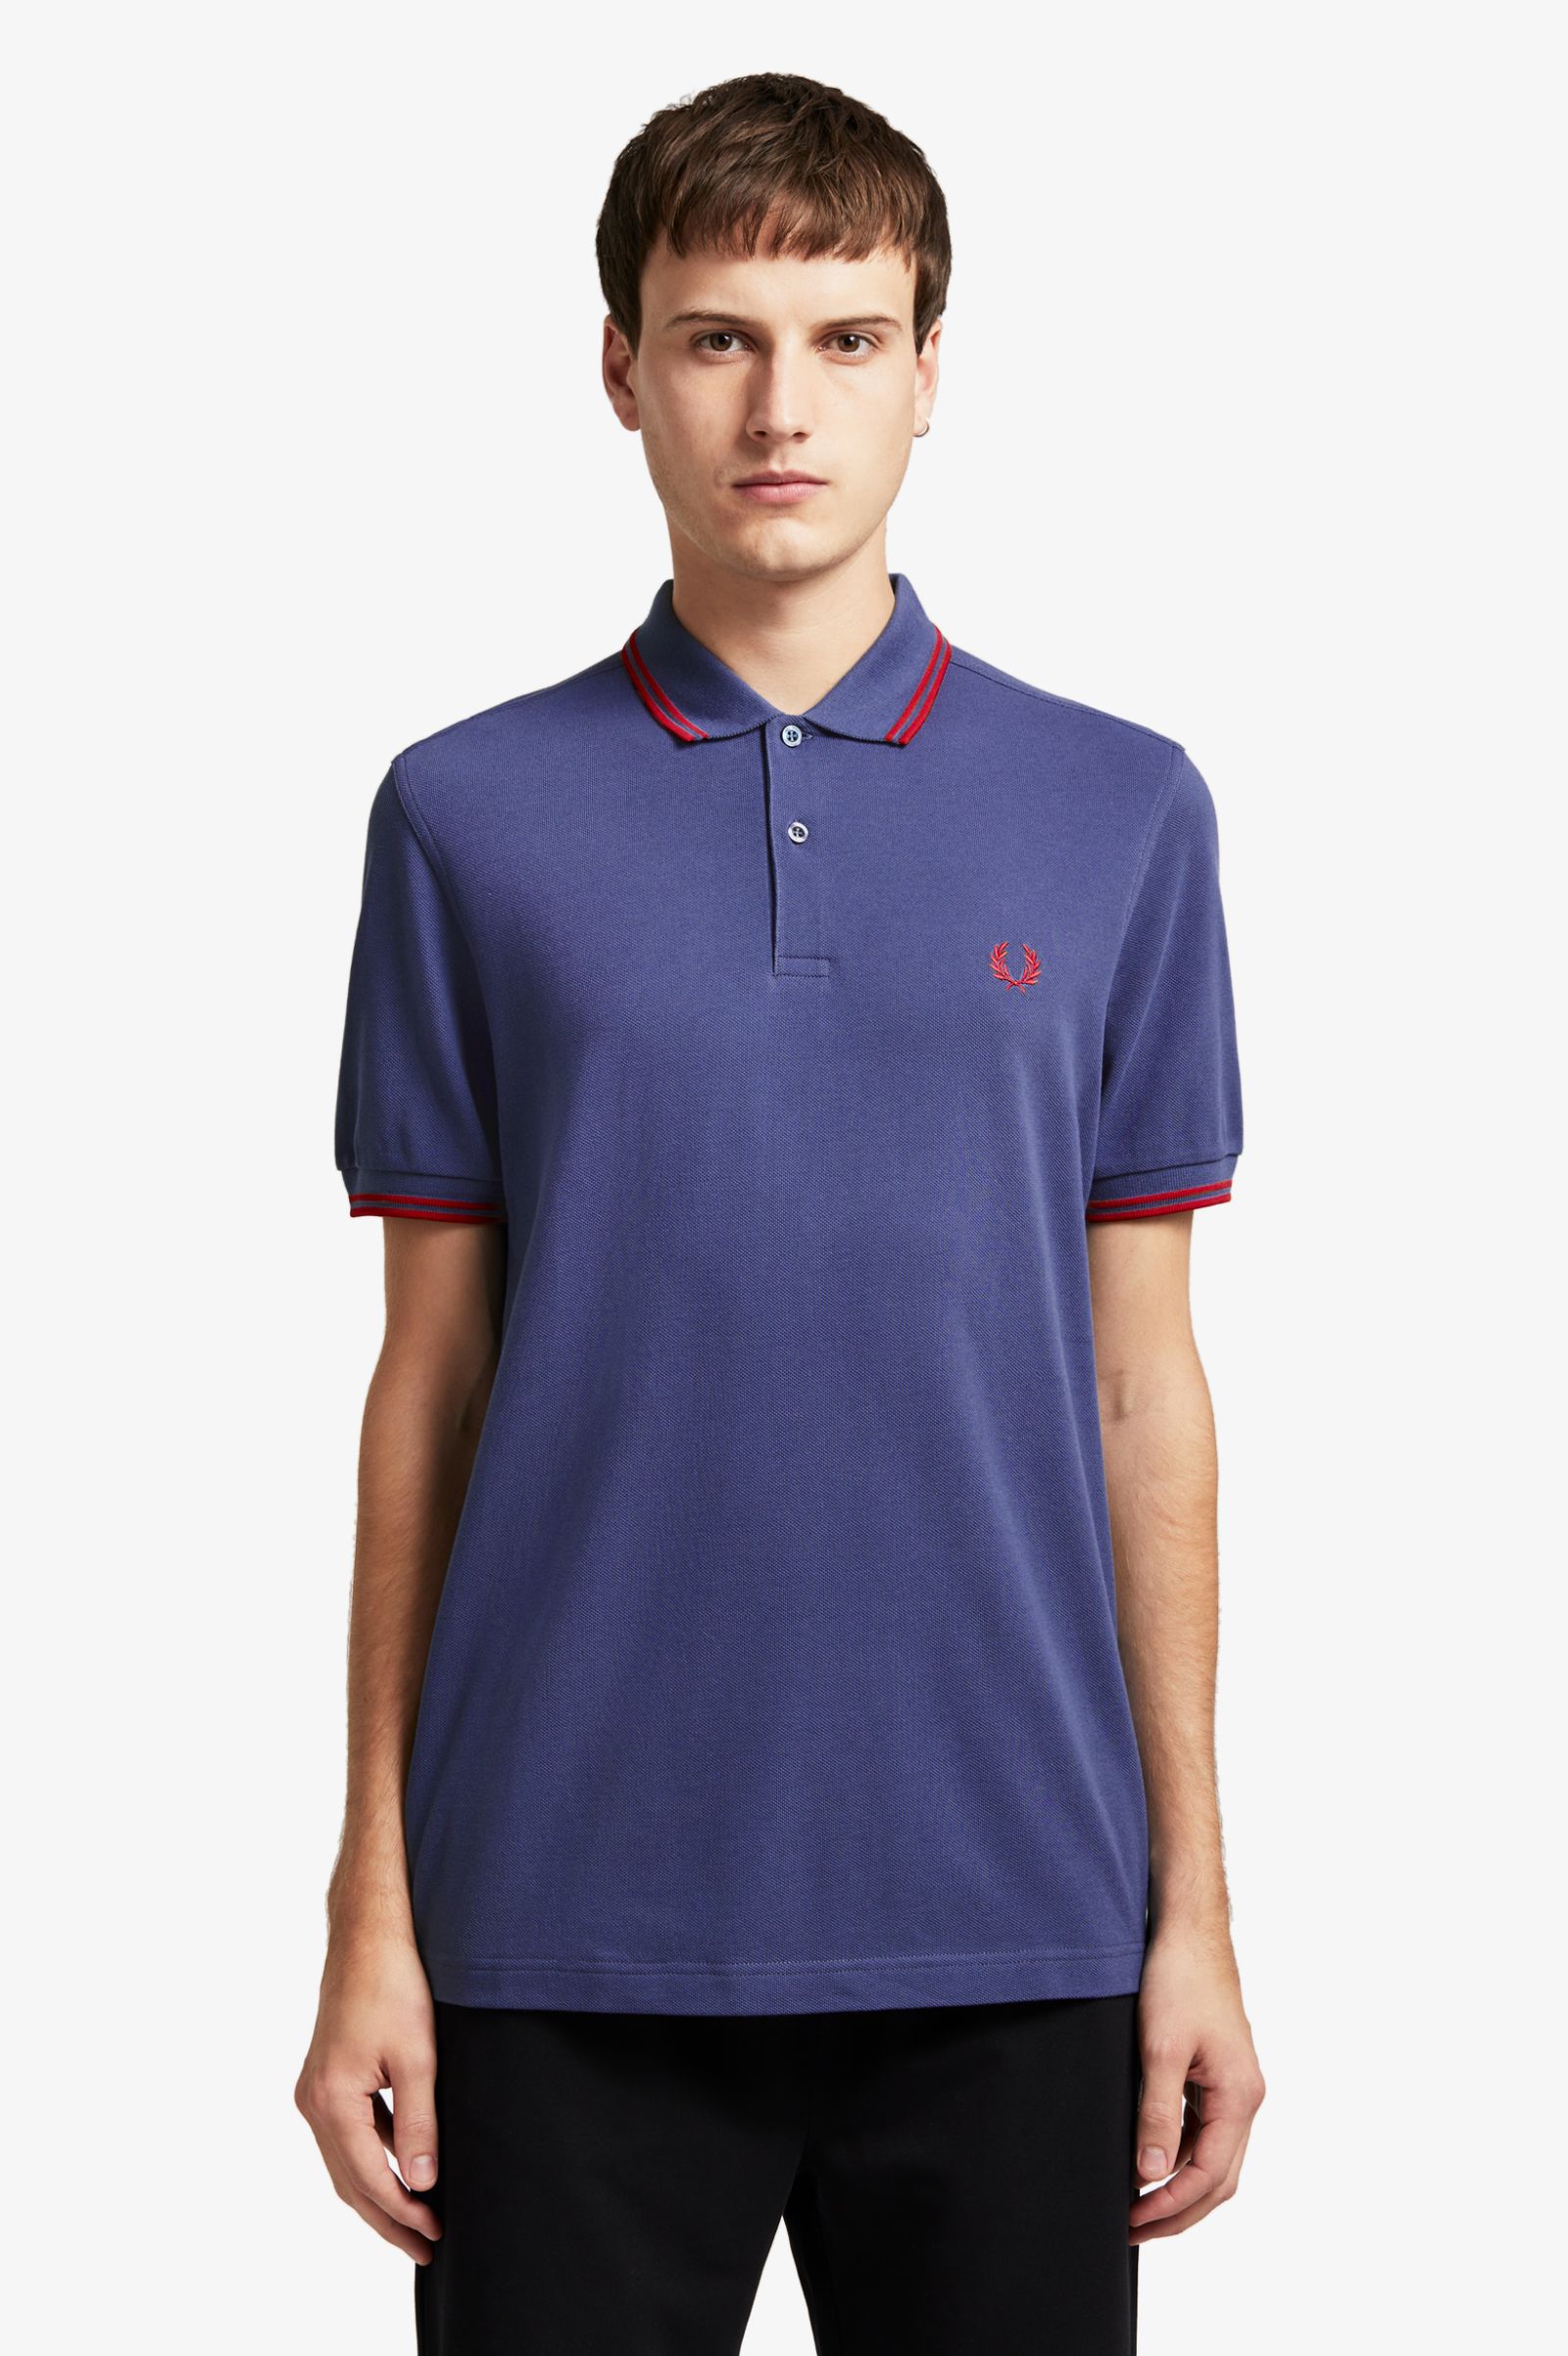 fred perry rugby shirt